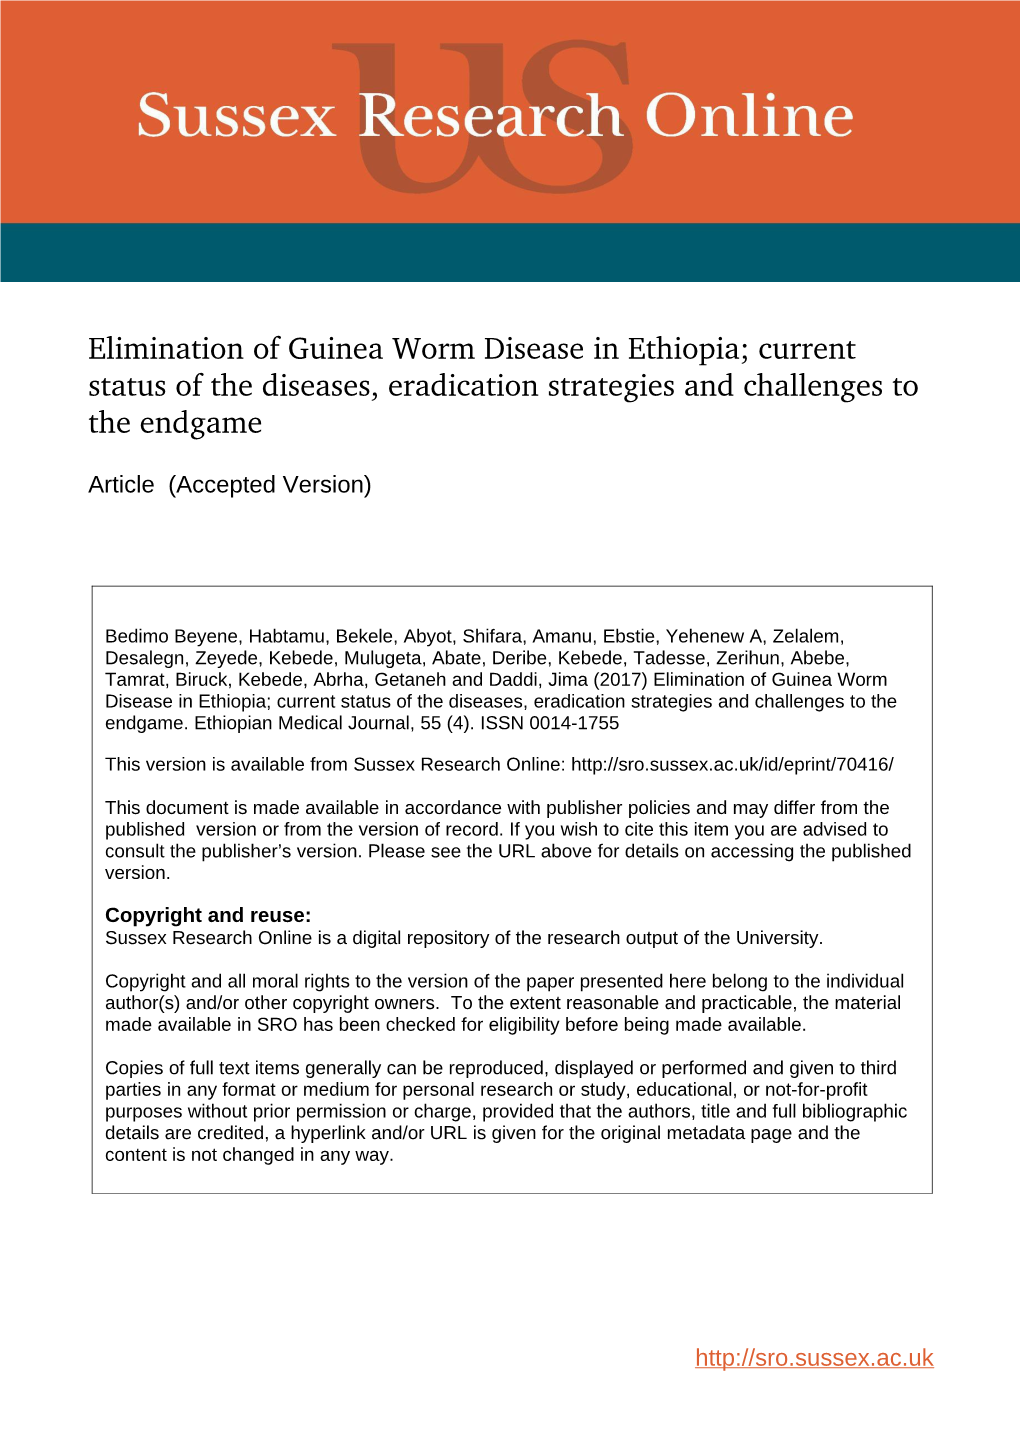 Elimination of Guinea Worm Disease in Ethiopia; Current Status of the Diseases, Eradication Strategies and Challenges to the Endgame